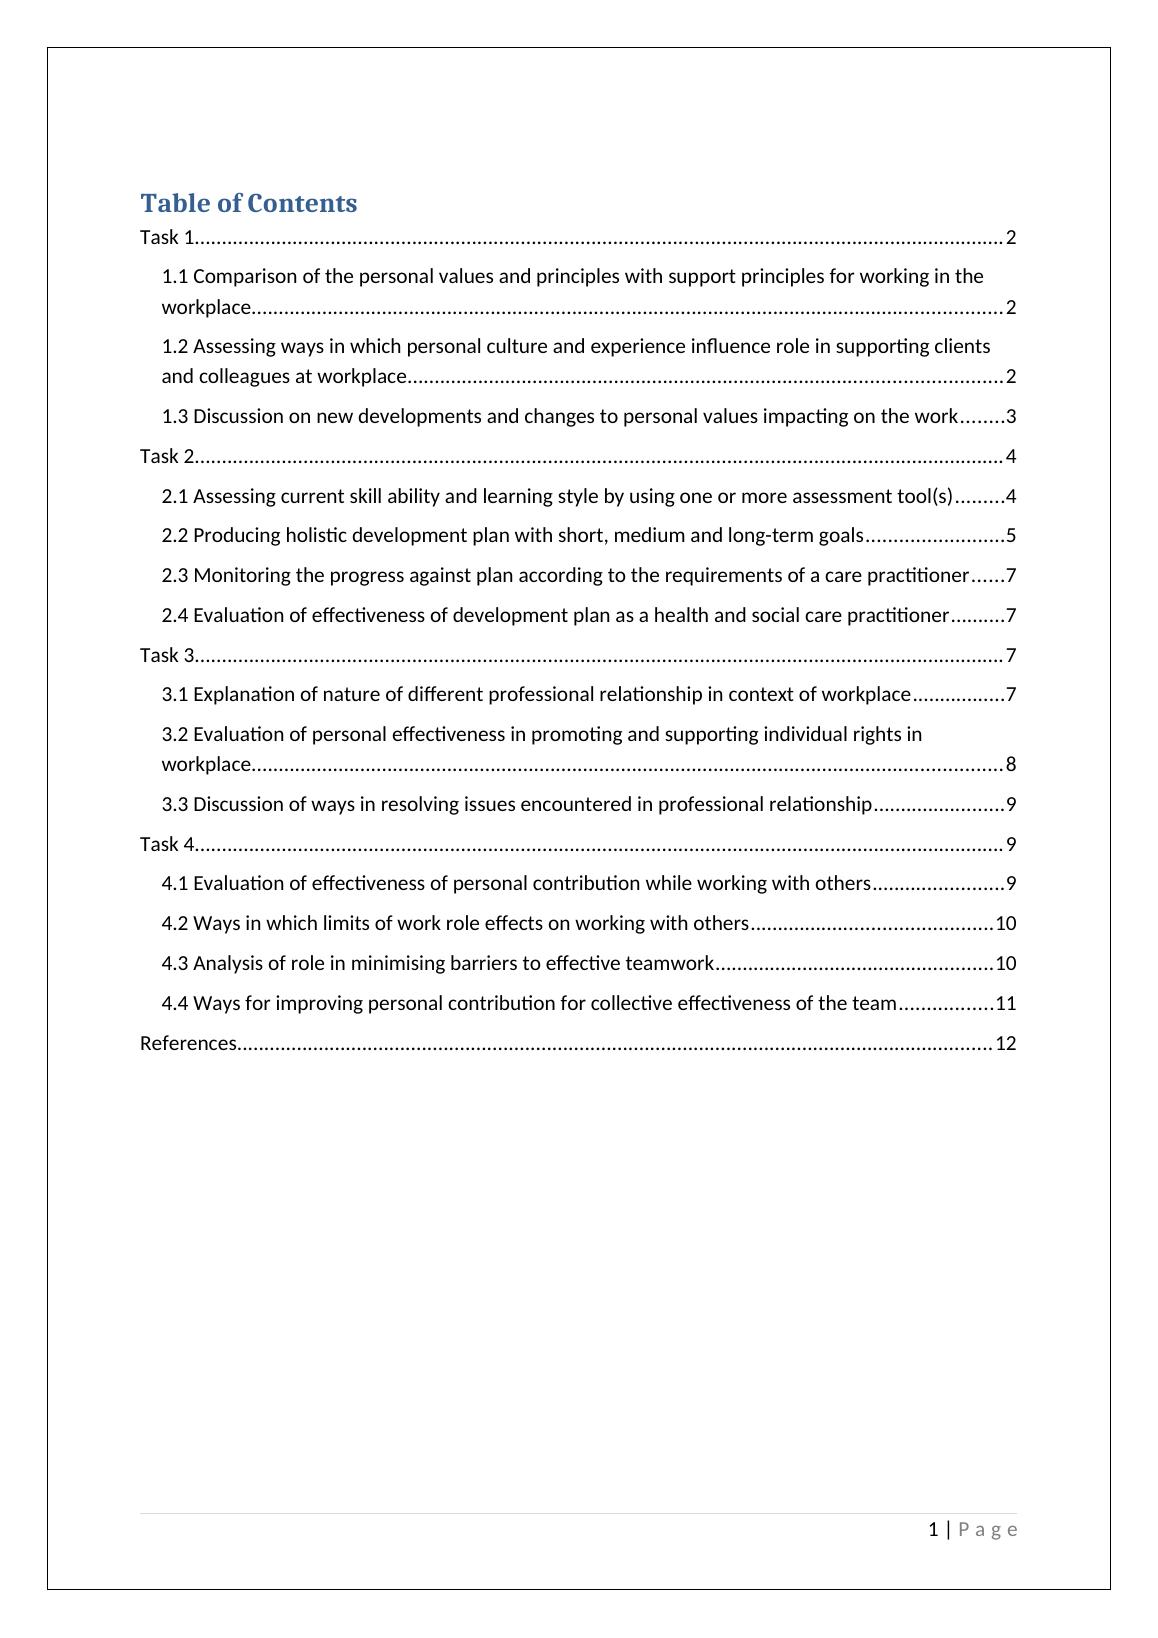 Comparison of Personal Values and Principles : Report_2